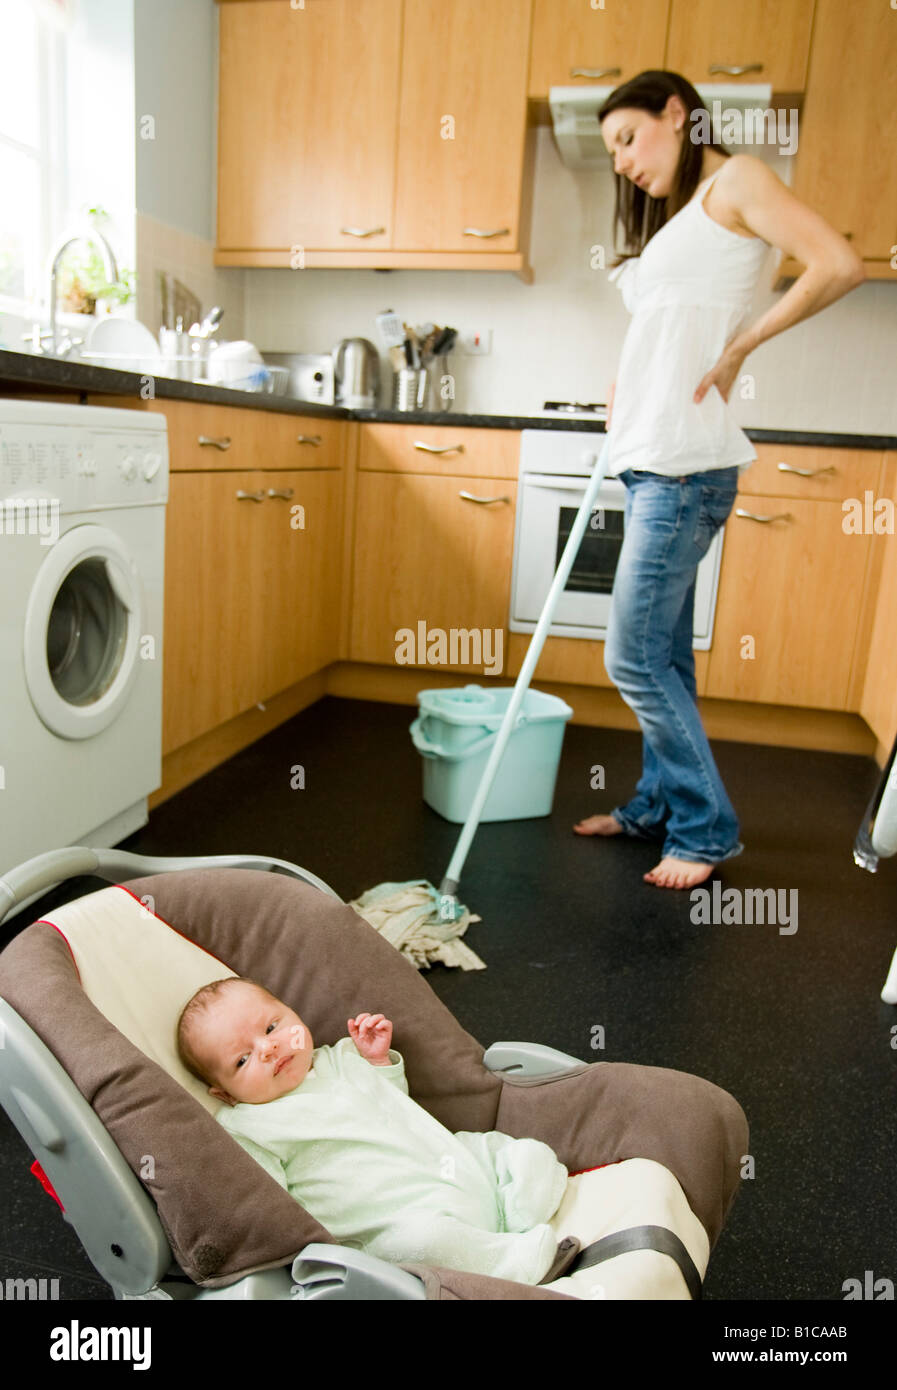 Woman cleaning floor with baby in foreground Stock Photo